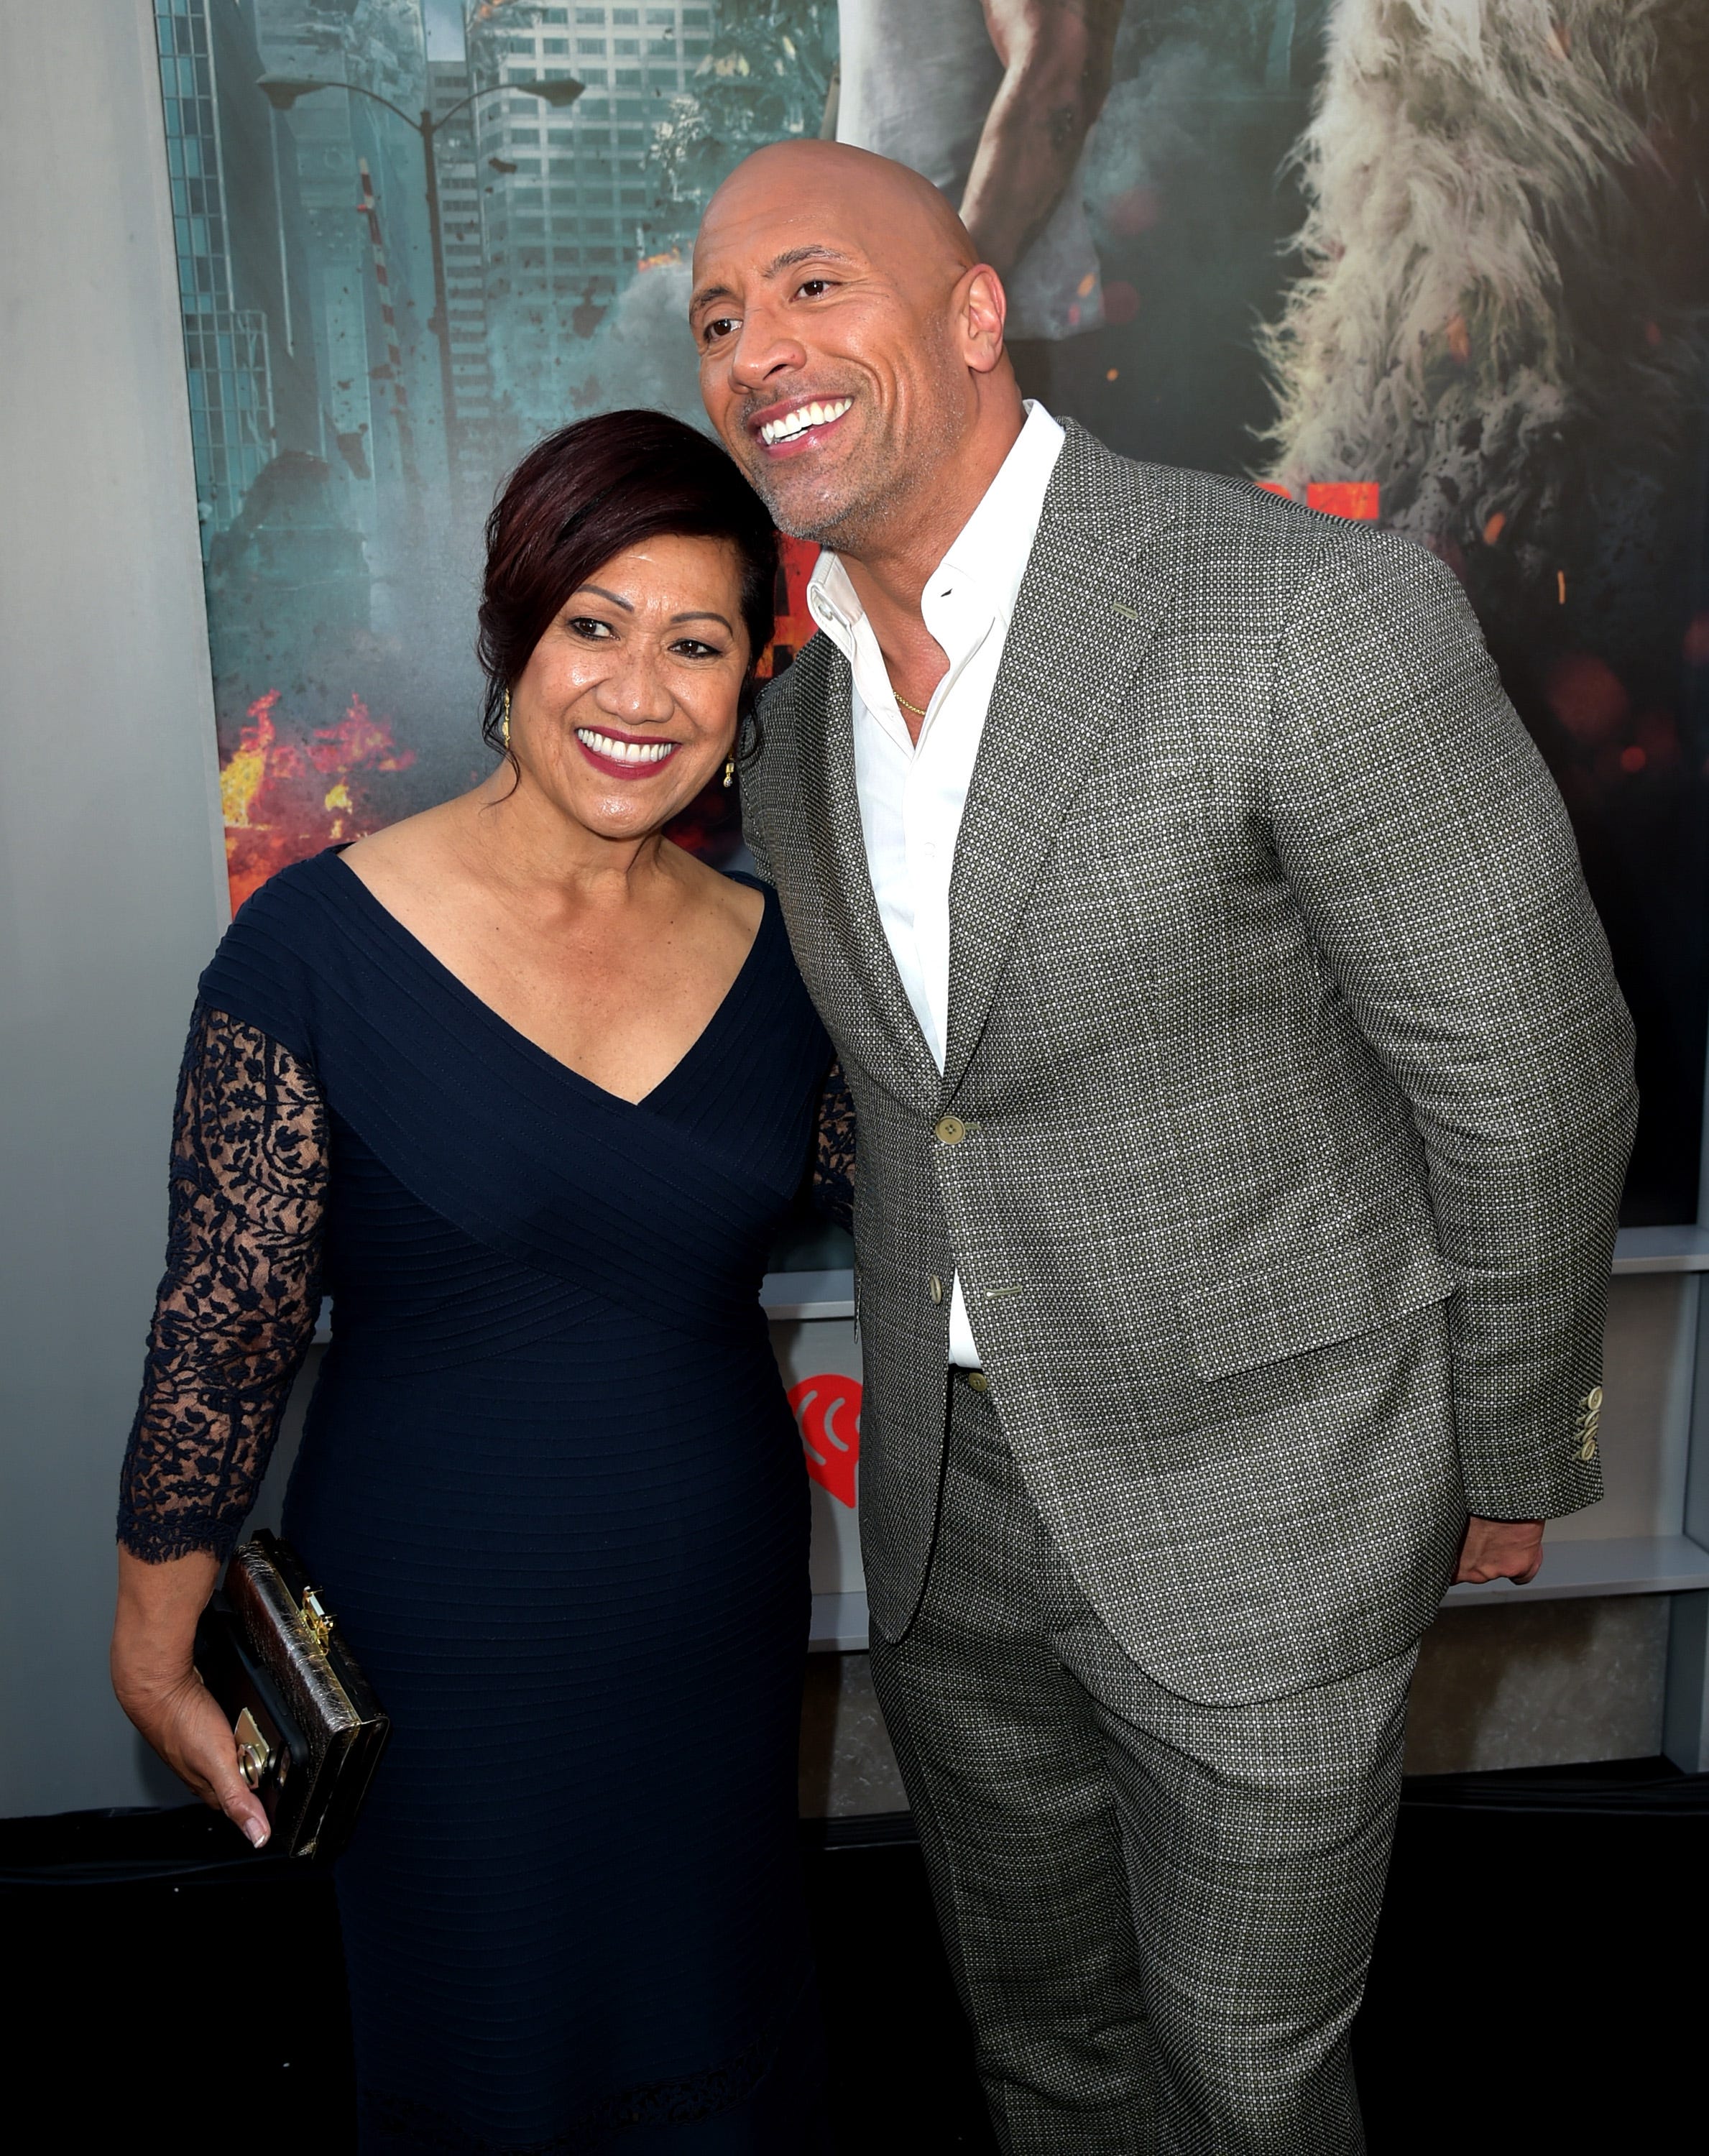 Dwayne Johnson reveals his mom is 'OK' after she was in a car accident: 'She's a survivor'